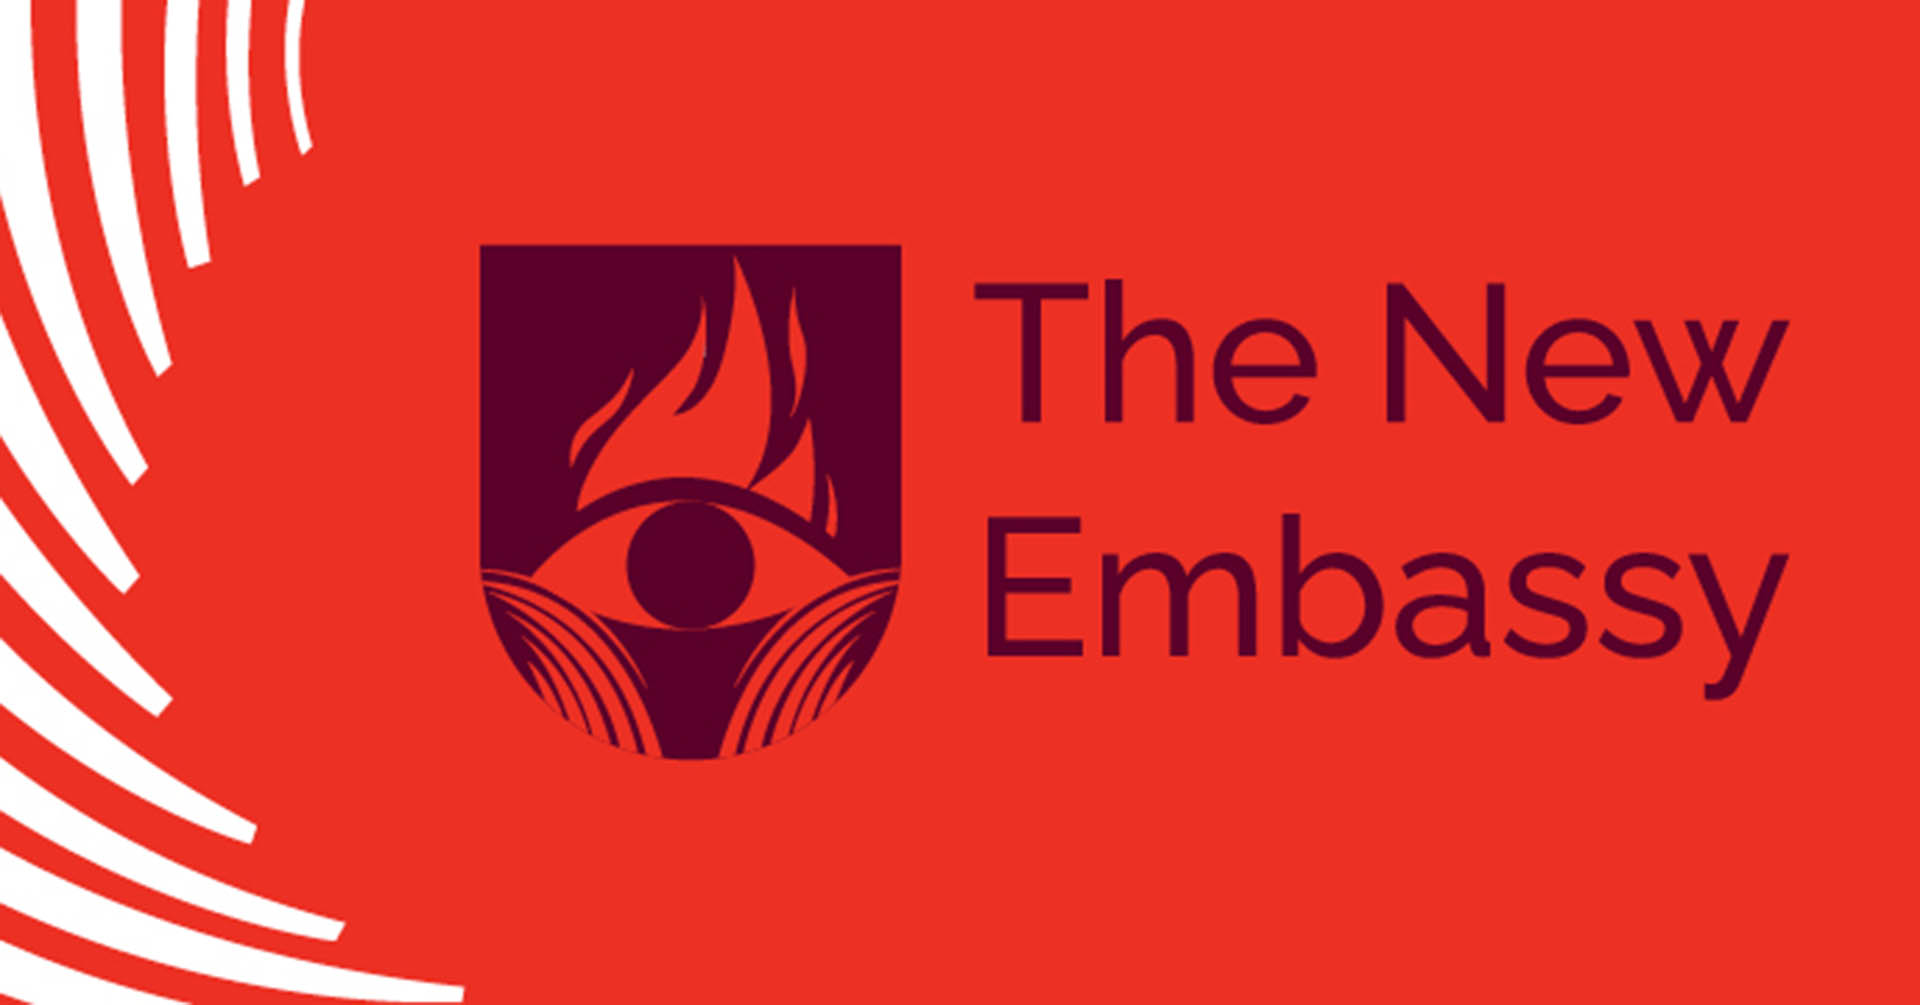 The New Embassy event banner. The New Embassy text on a red background with white swirls to the left. The logo has an eye with flames above it.